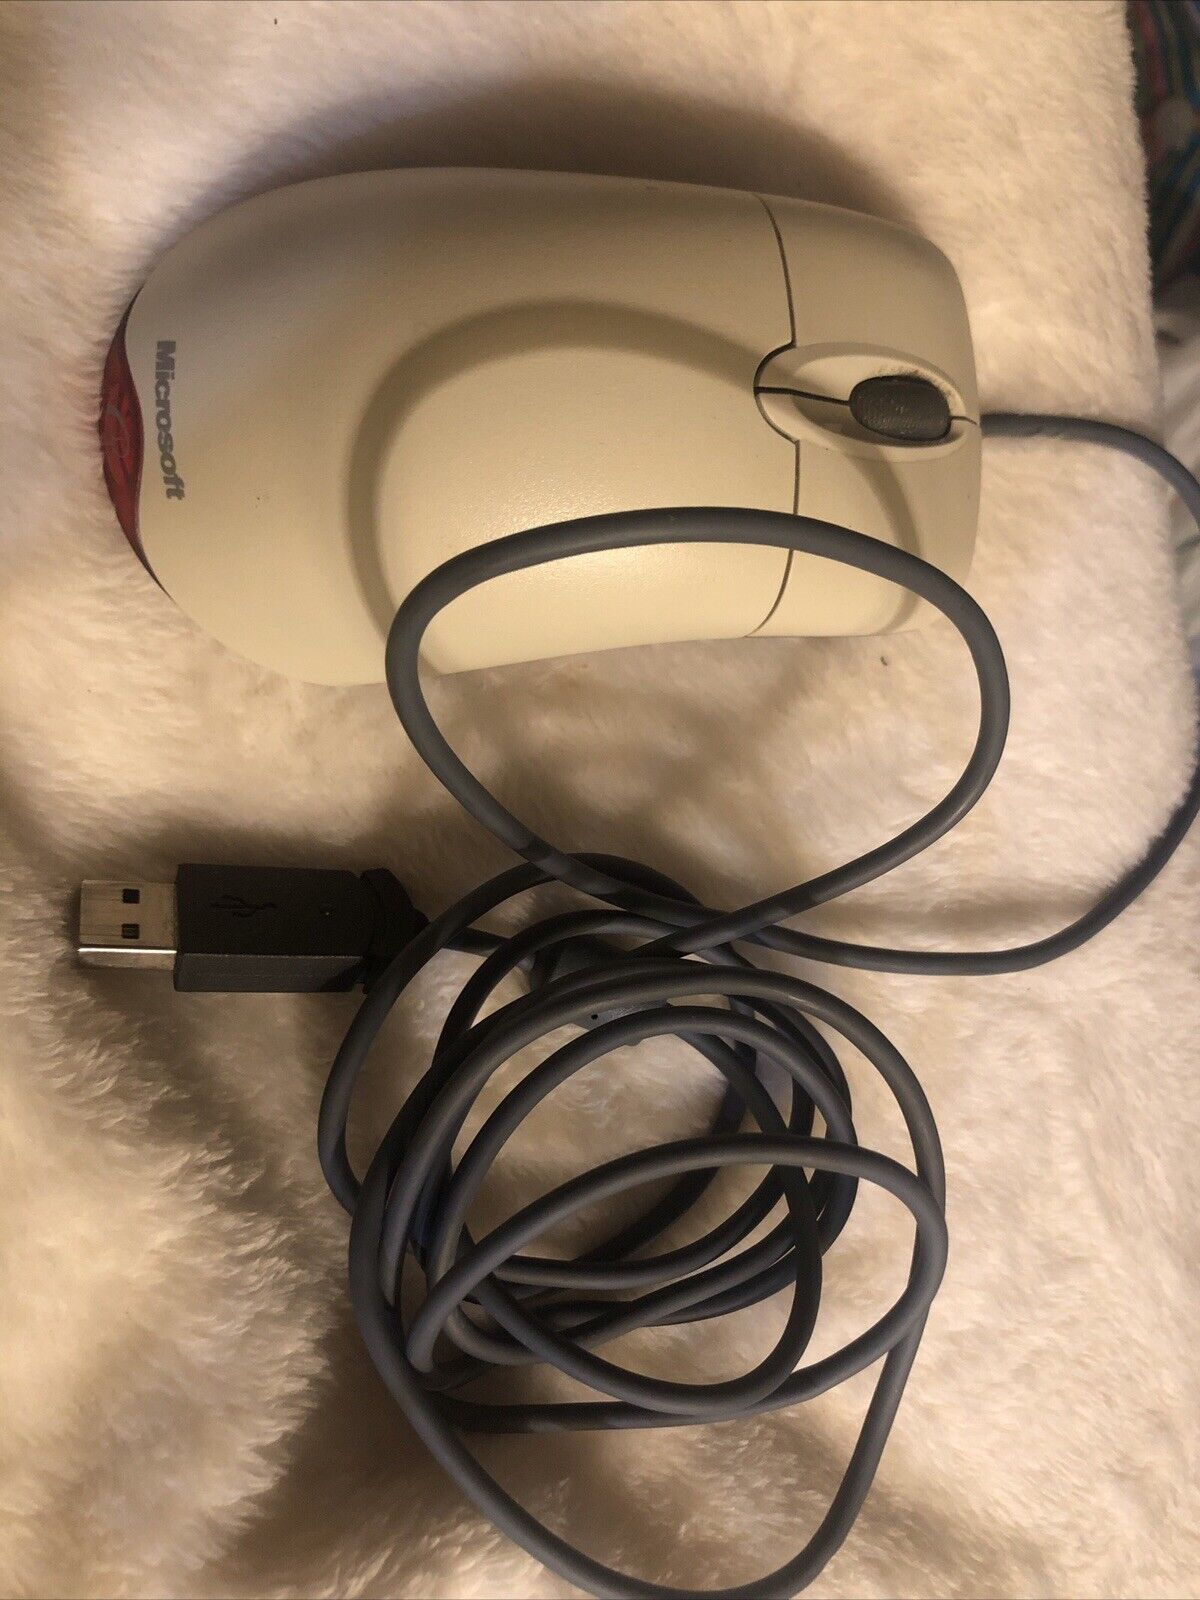 Vintage White Microsoft Wheel Mouse Optical USB Mouse 1.1A Tested Works Great